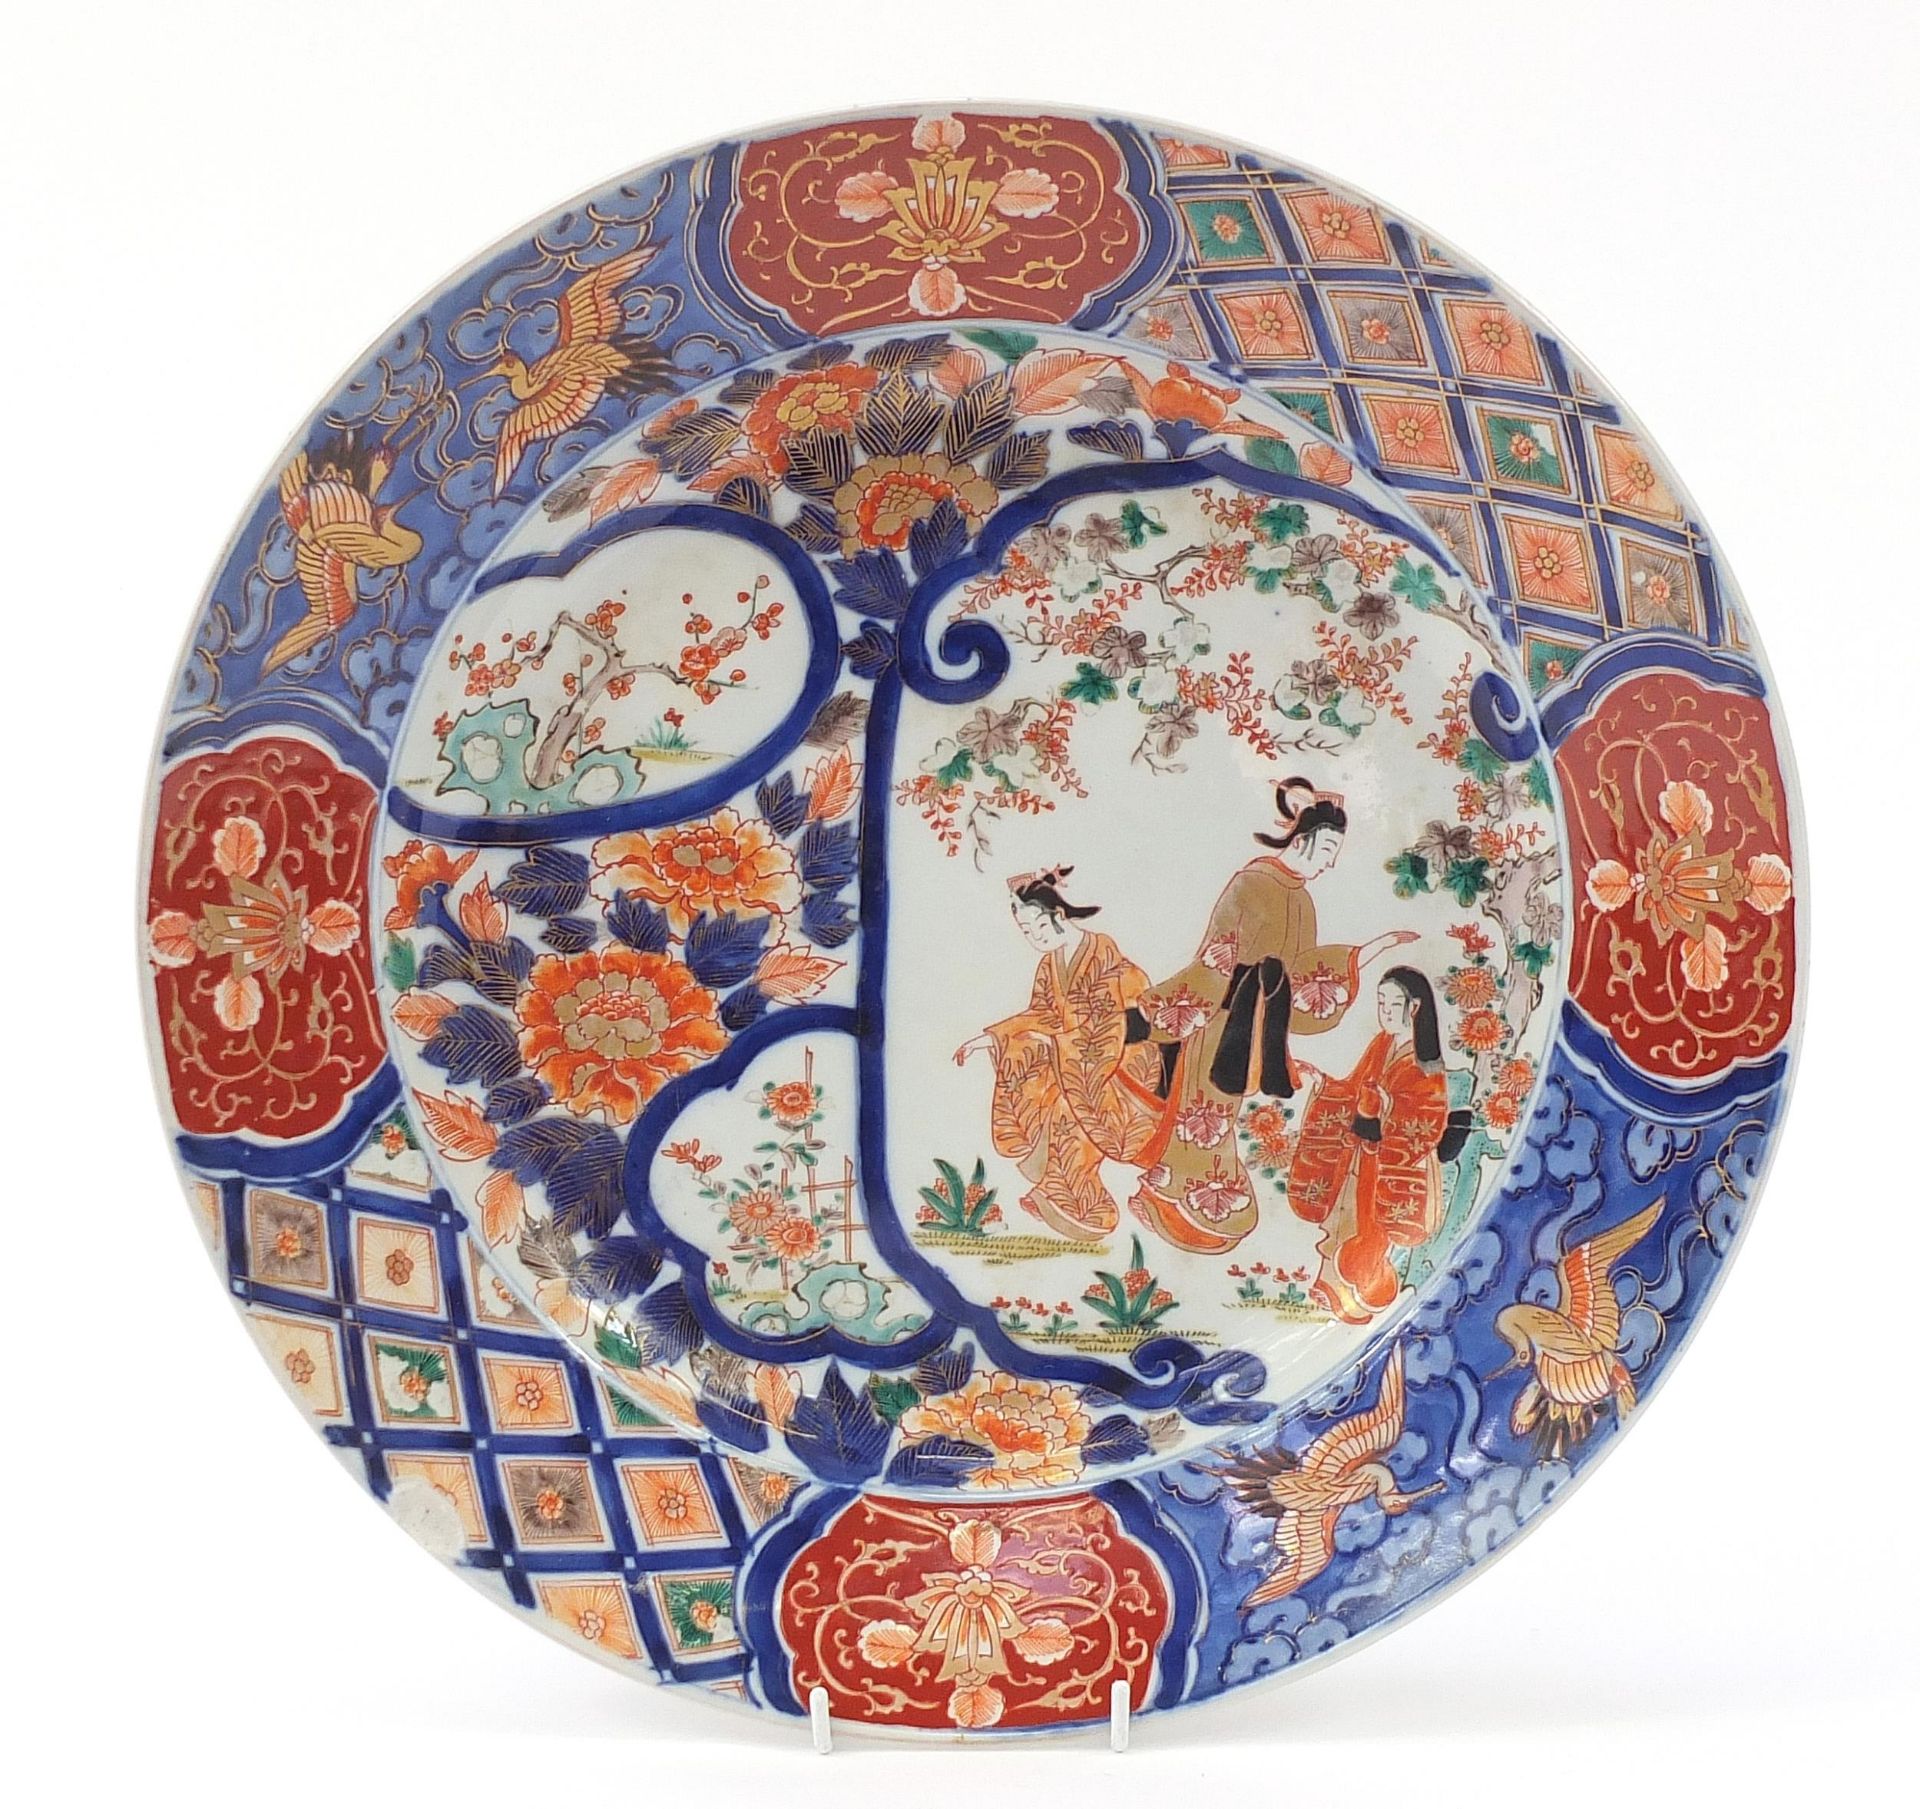 Japanese Imari porcelain charger hand painted with figures, birds and flowers, 41cm in diameter